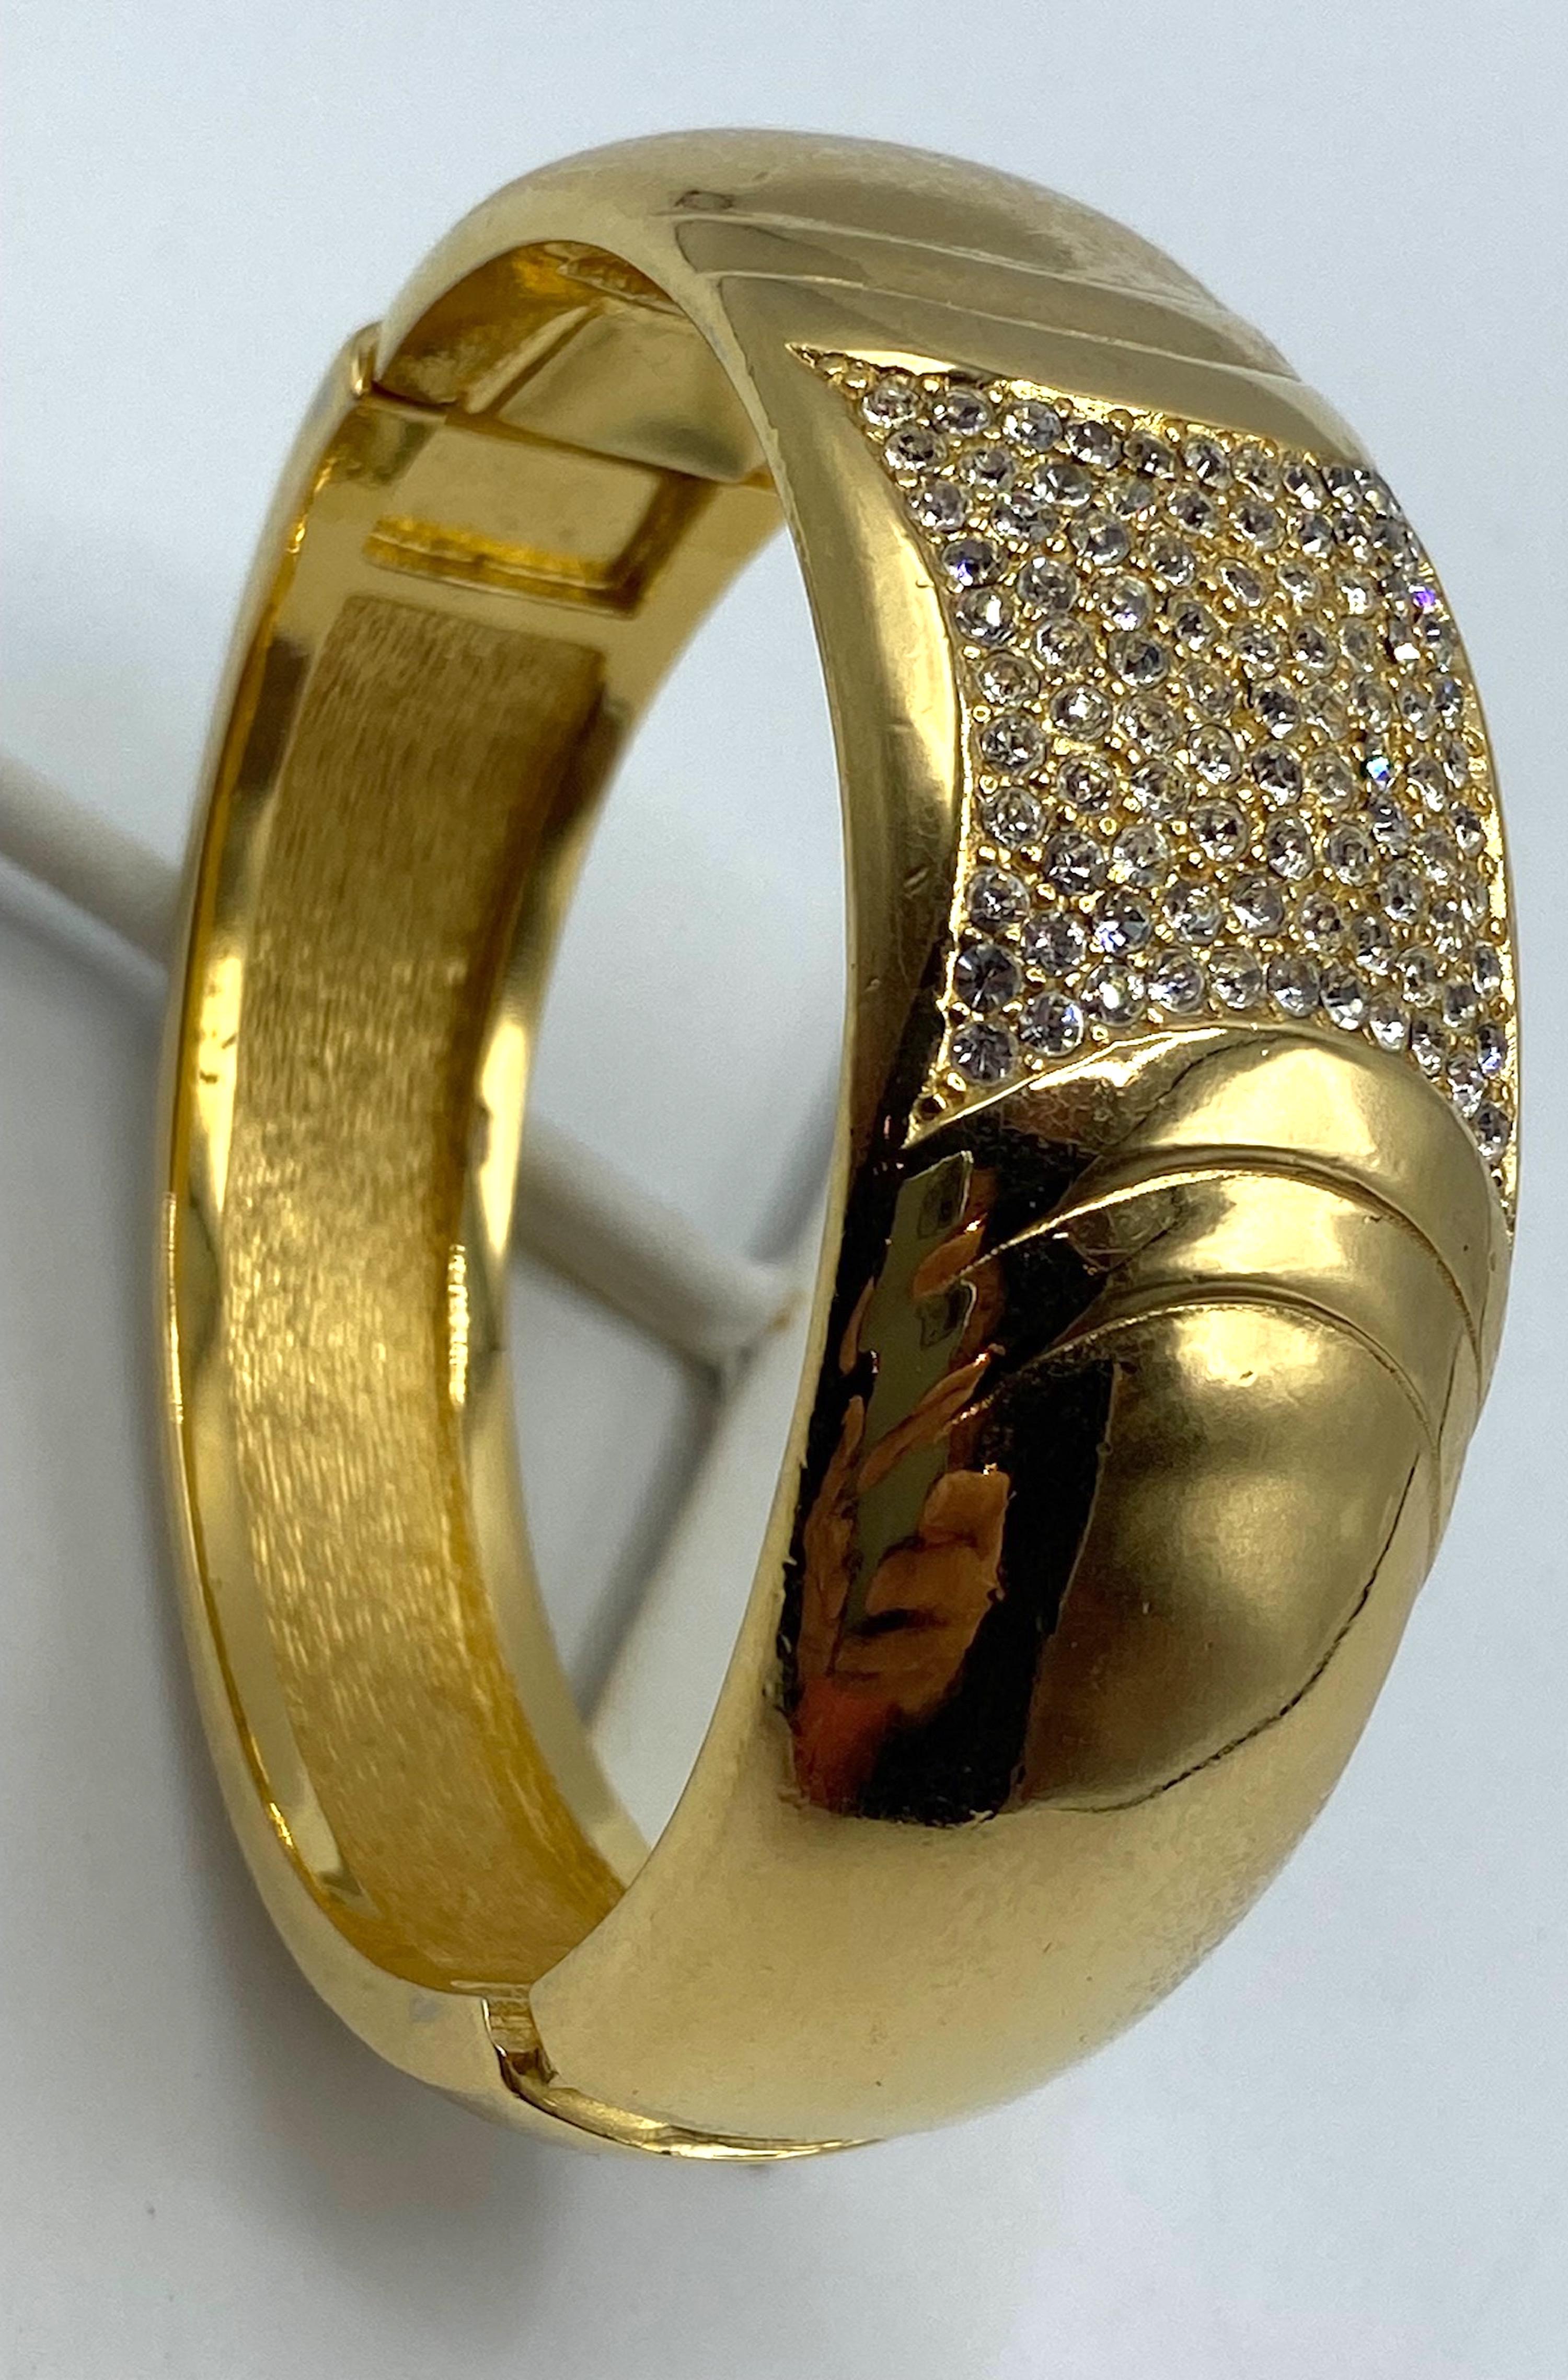 Women's Christian Dior 1980s Gold with Rhinestone Art Deco Style Bangle Bracelet For Sale